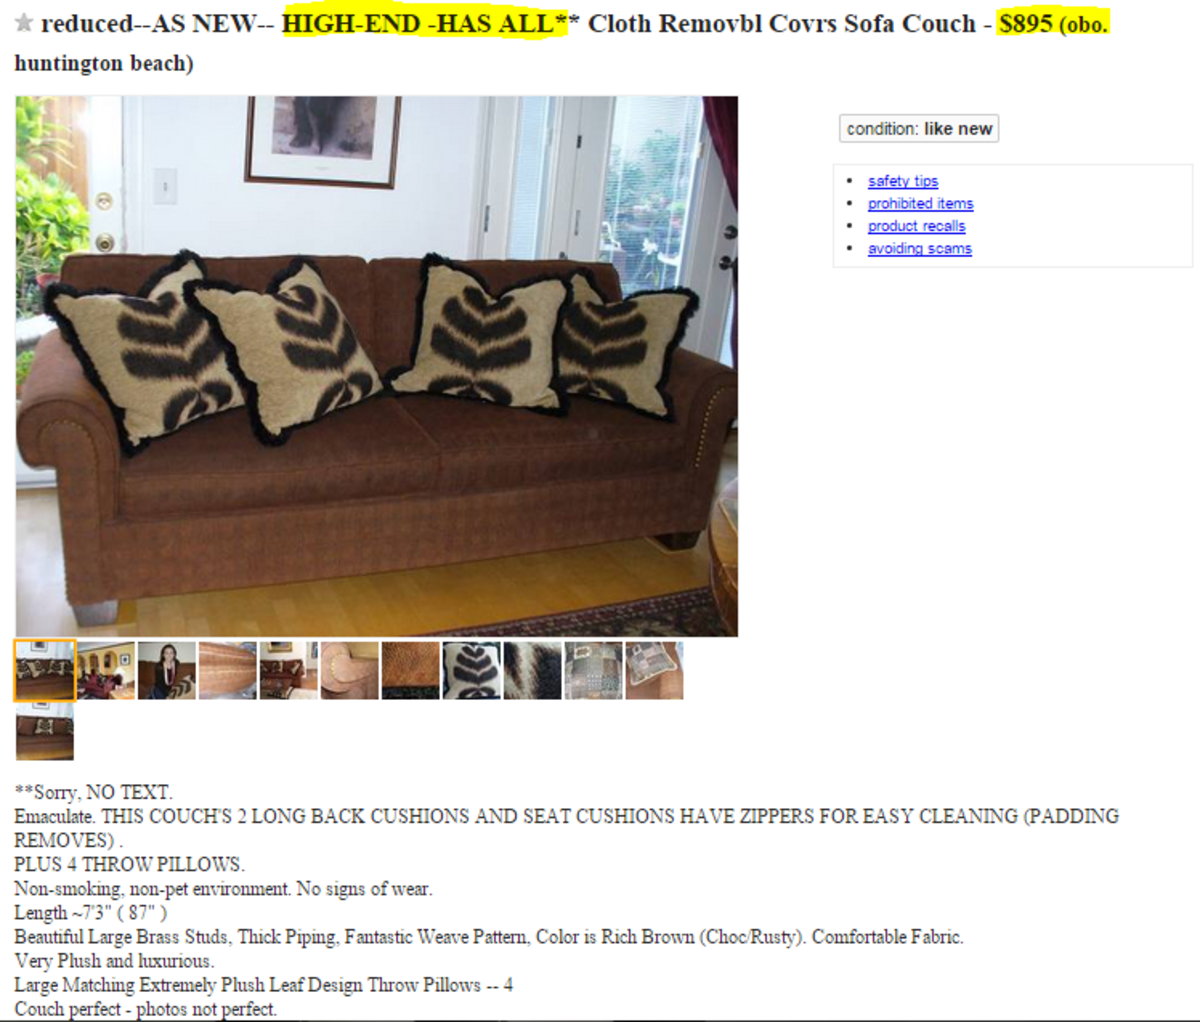 Don't bother with ones like this.  This person probably paid thousands of dollars for their couch and think $895 is a steal.  This couch is worth about $175 on the used market.